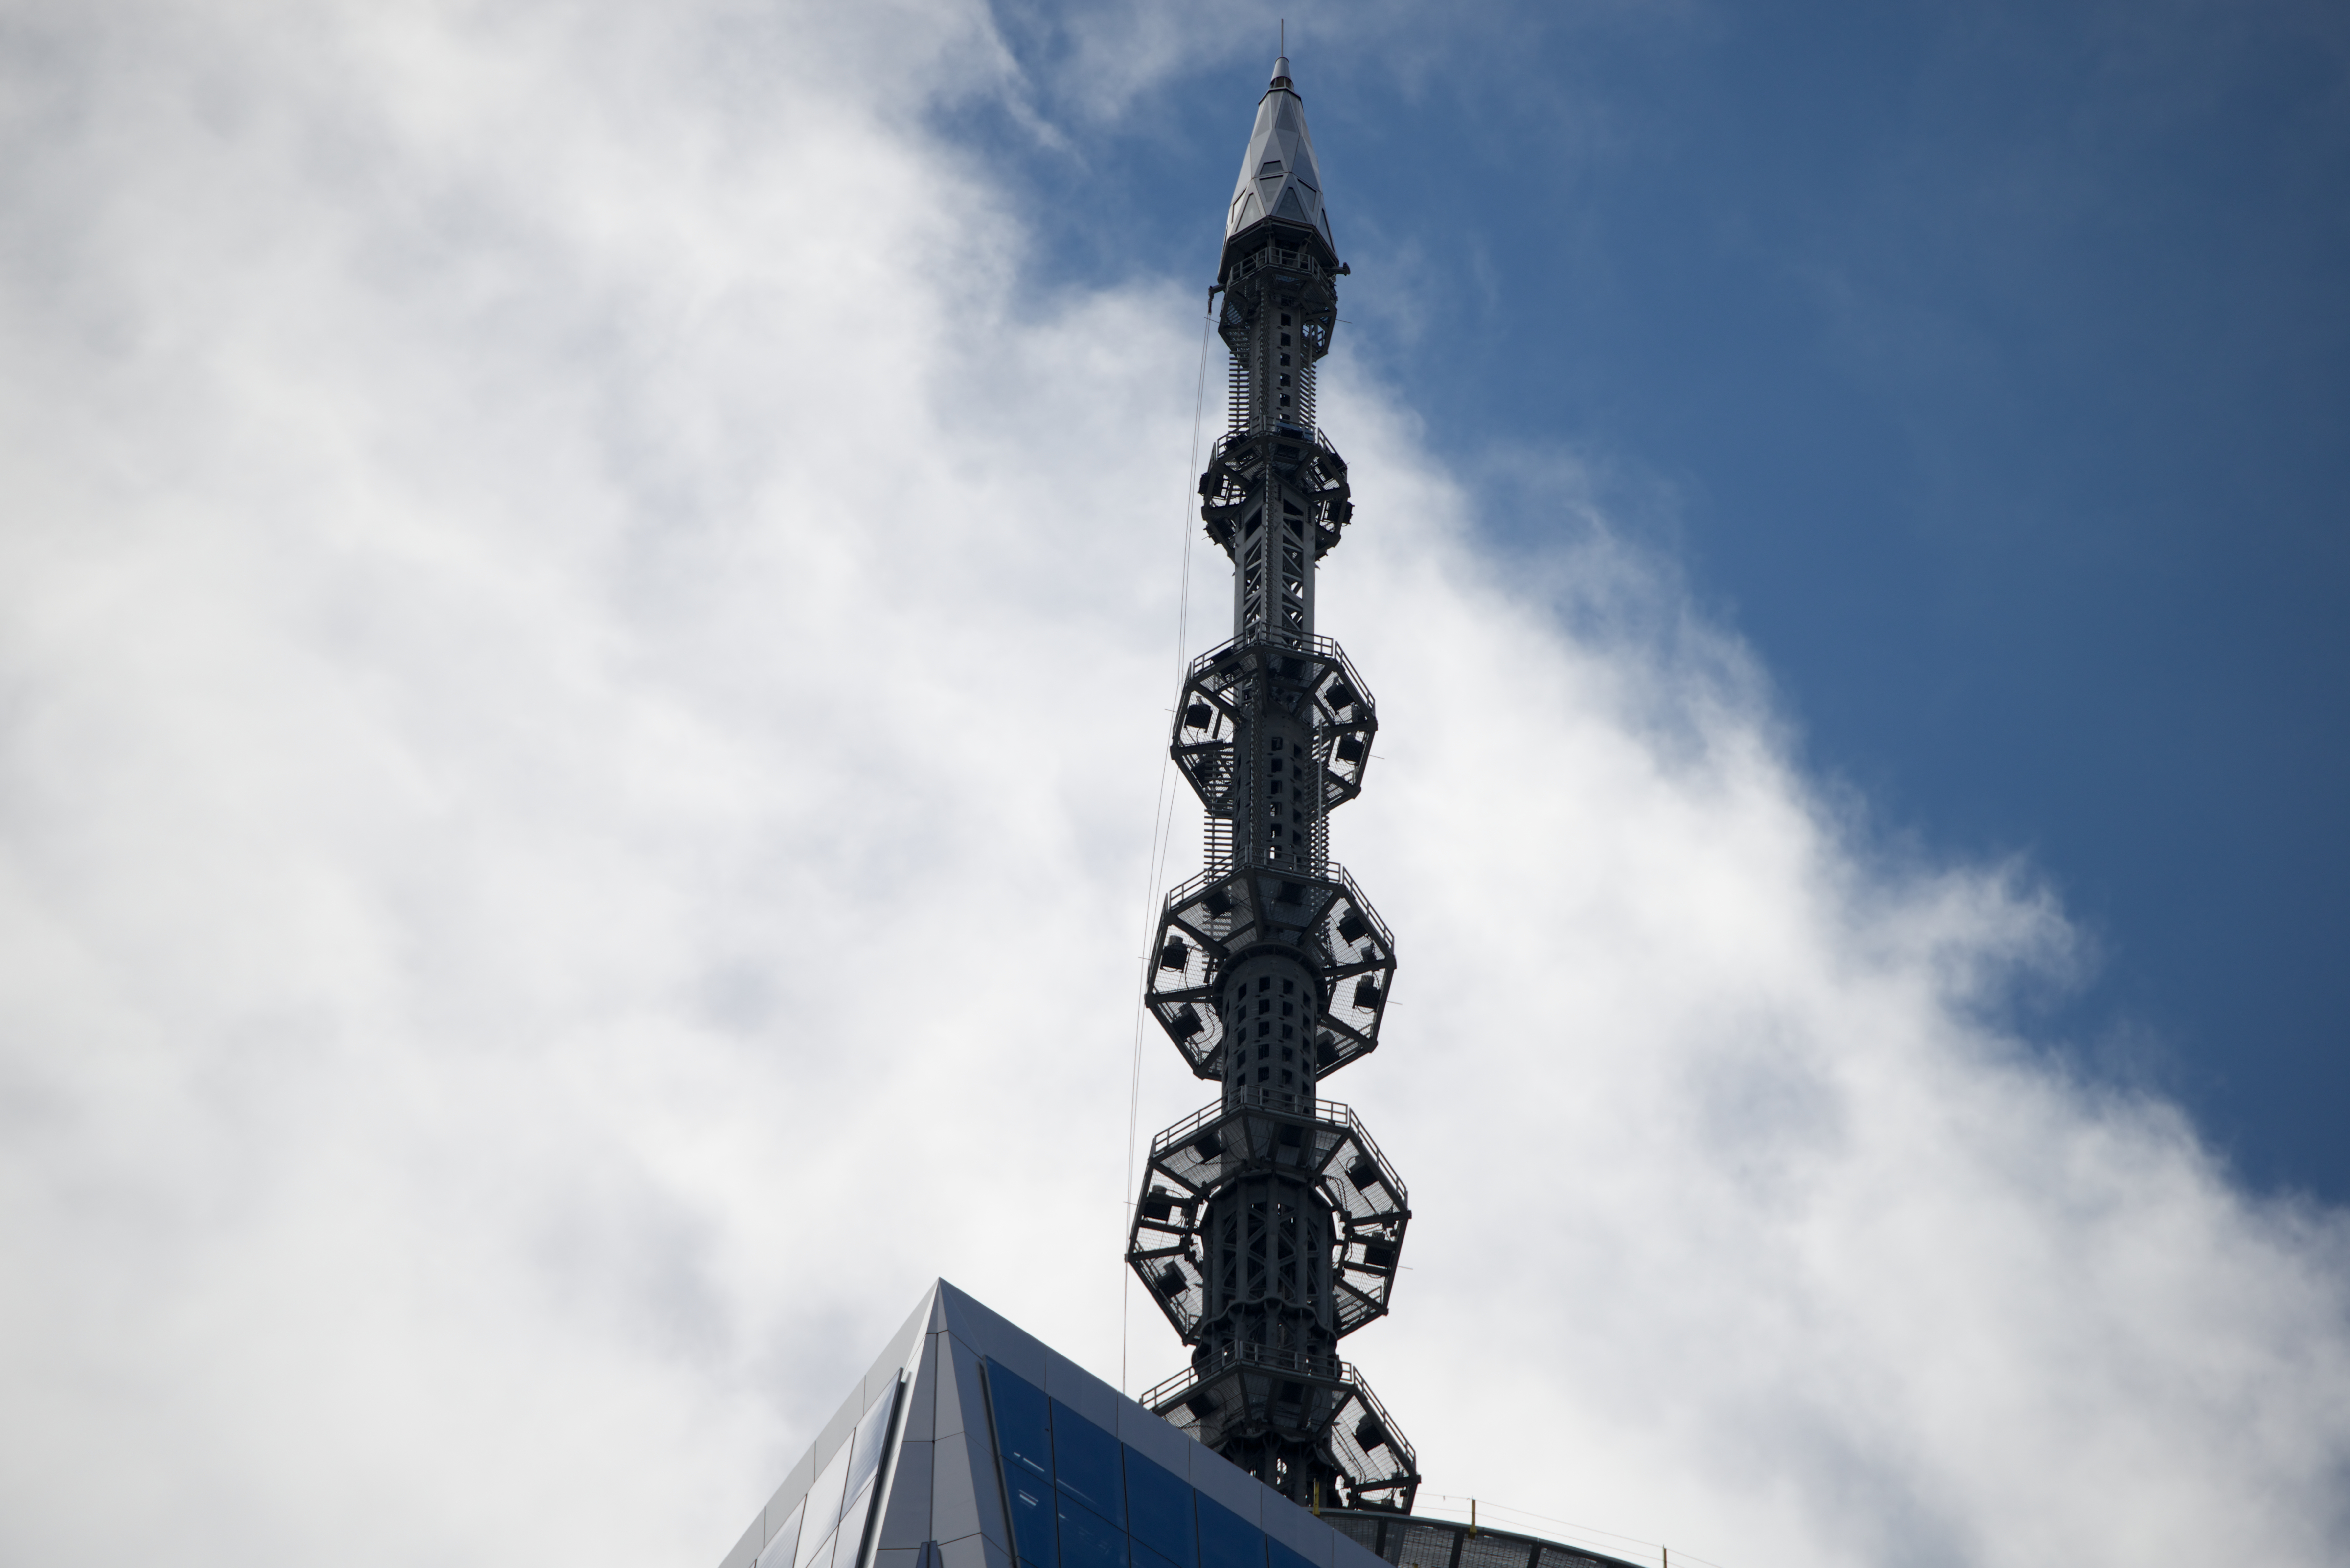 File:Antenna on the top of One World Trade Center building.jpg ...